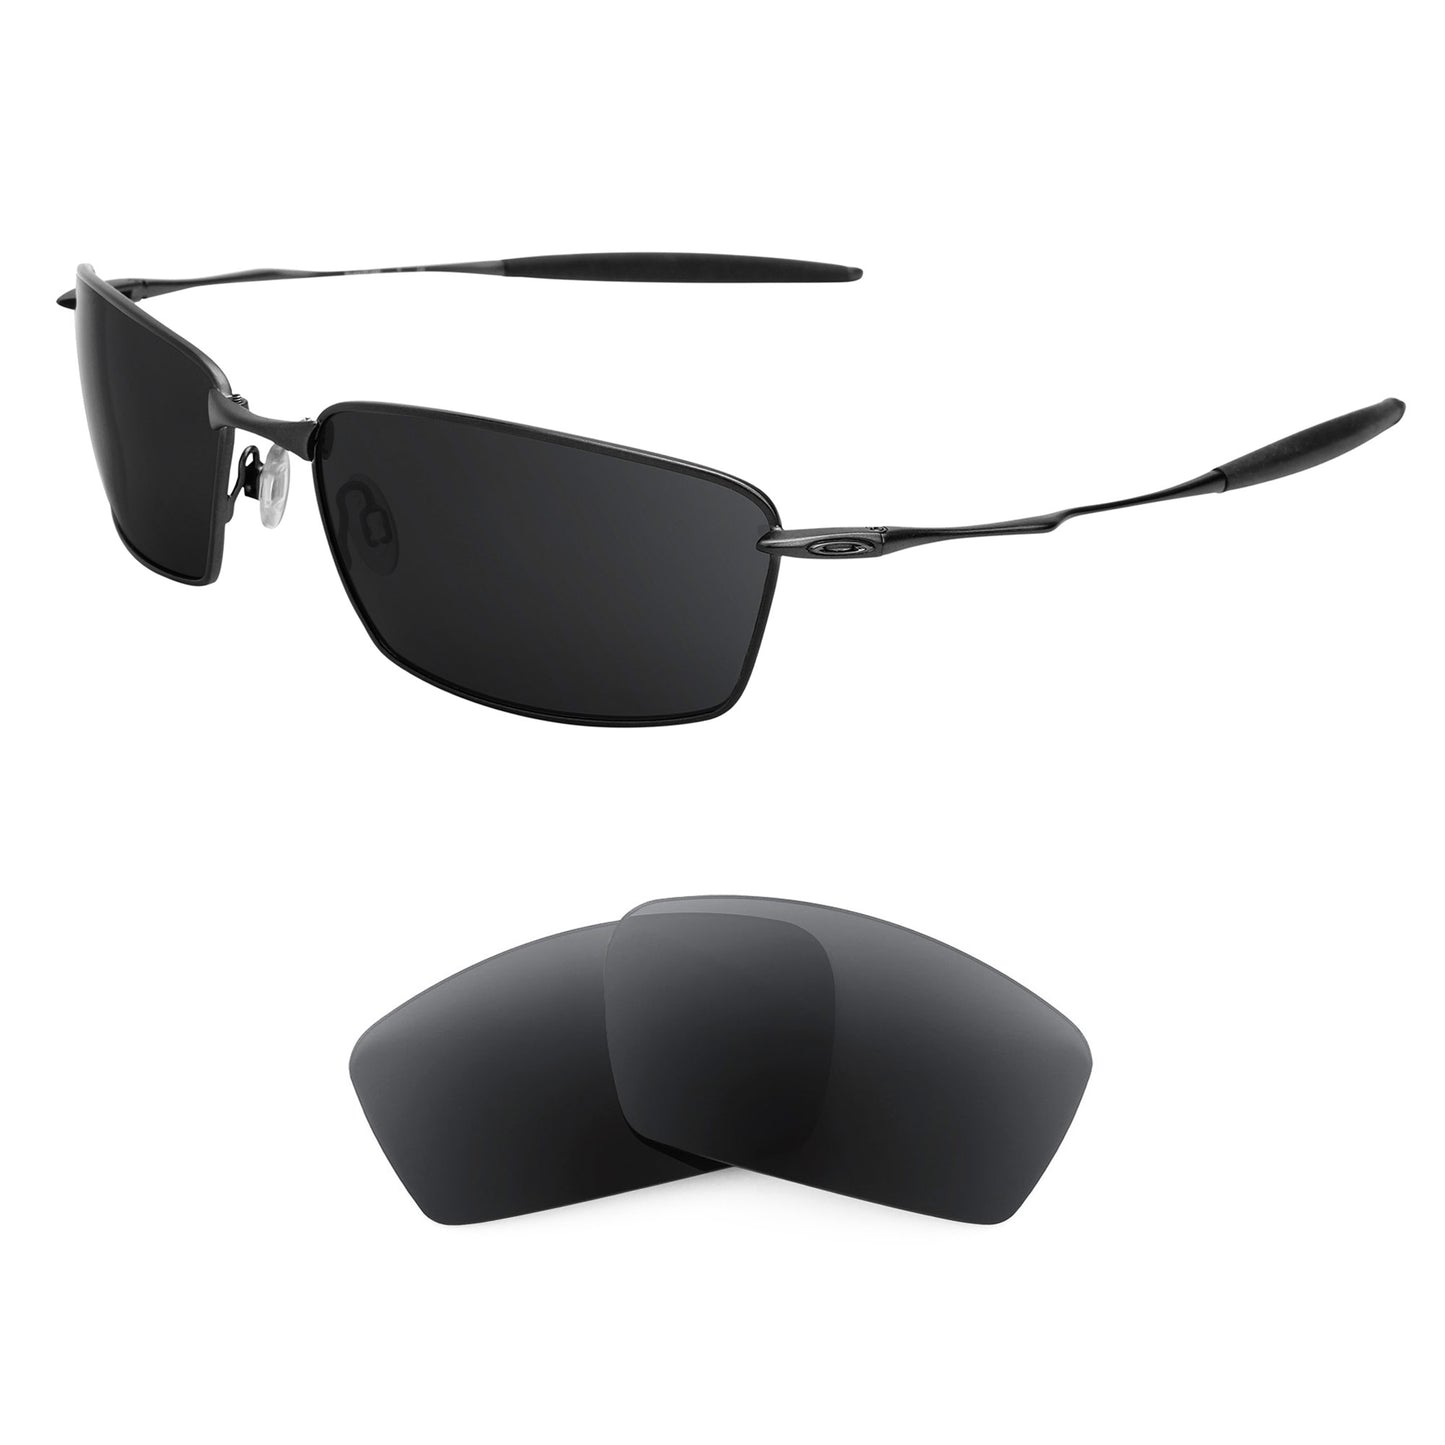 Oakley Square Whisker sunglasses with replacement lenses